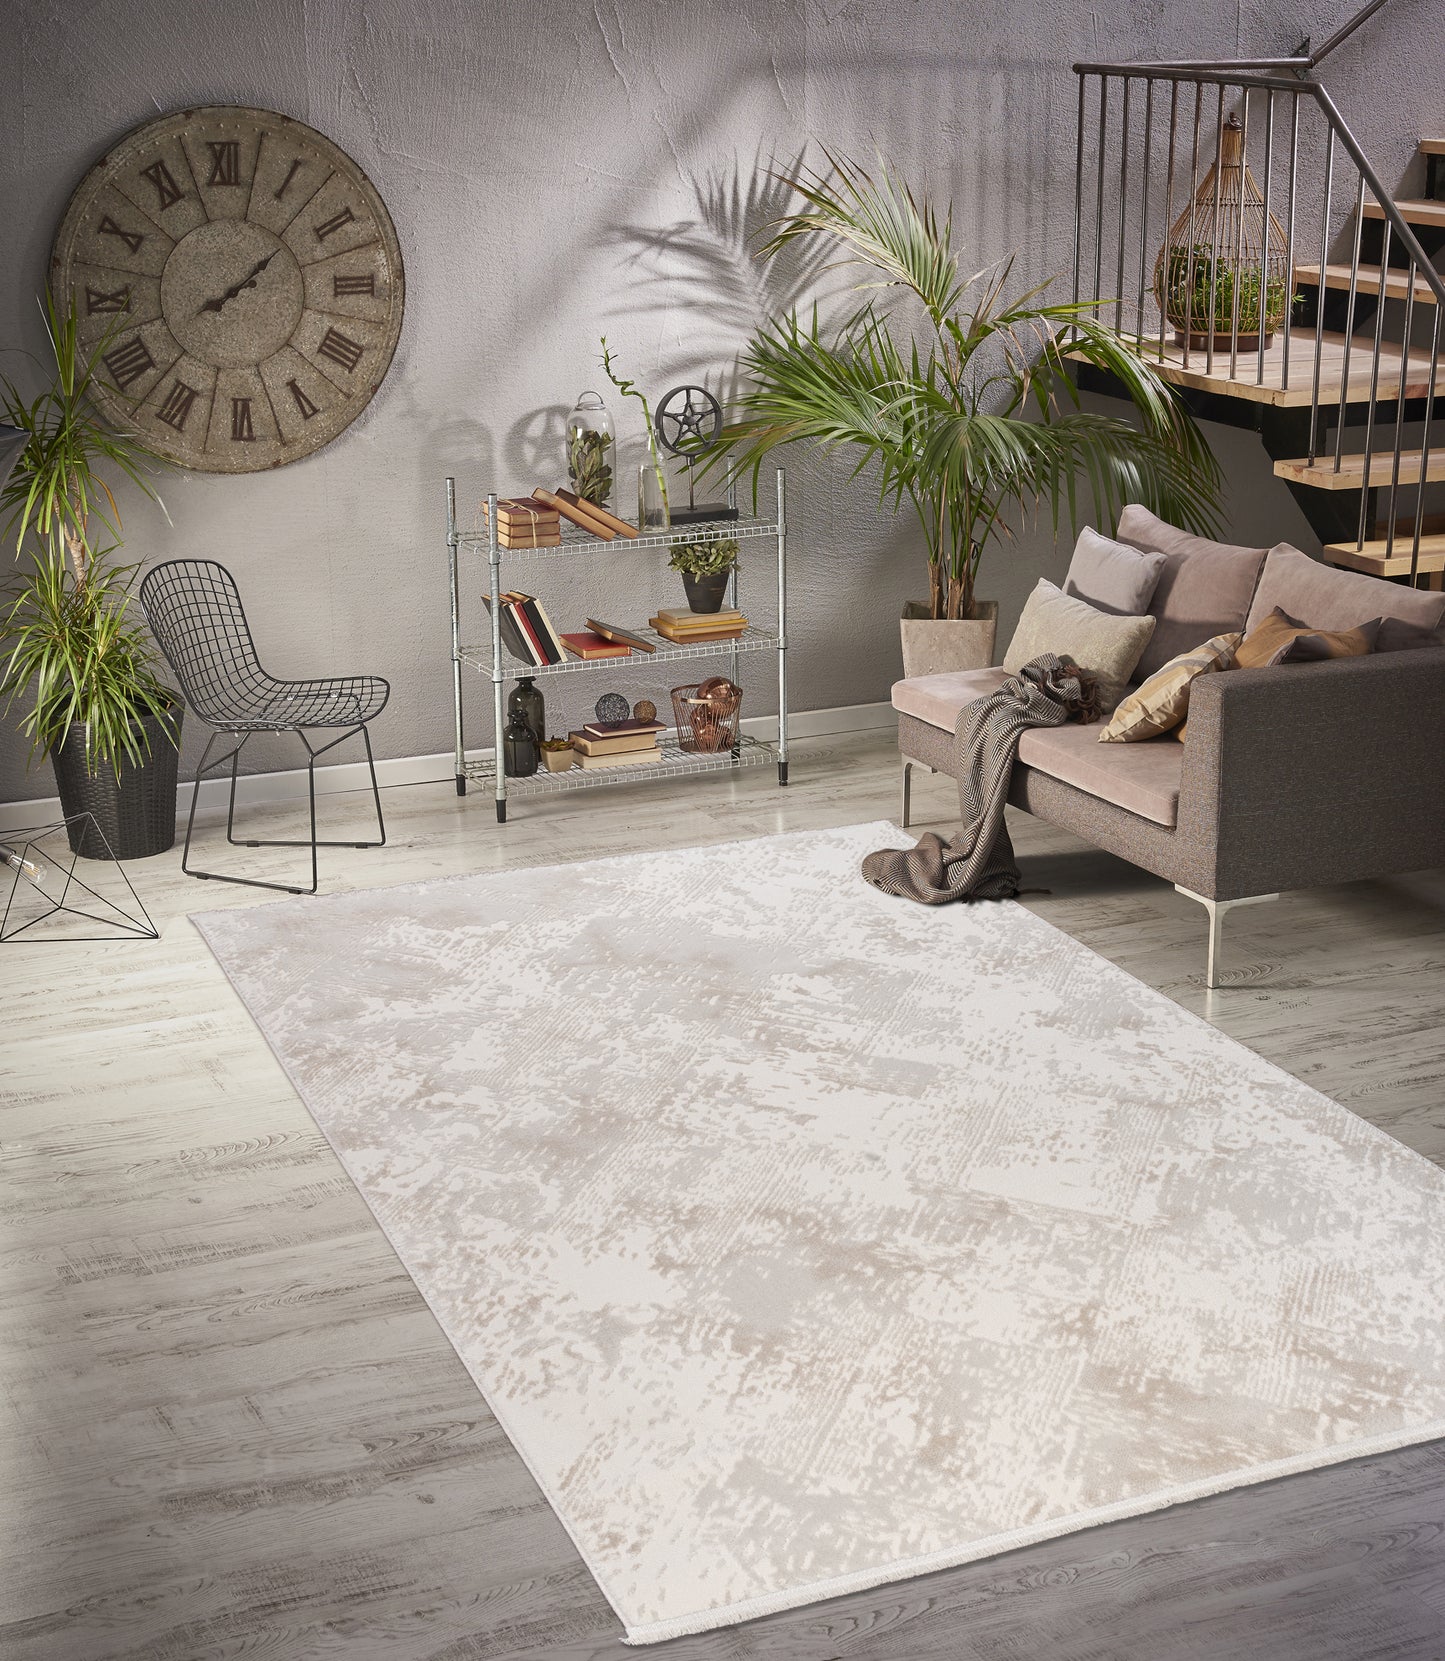 Ladole Rugs Abstract Pattern Home Decor Indoor Area Rug - Amazing Premium Carpet for Living Room, Bedroom, Dining Room, Kitchen, and Office - Cream